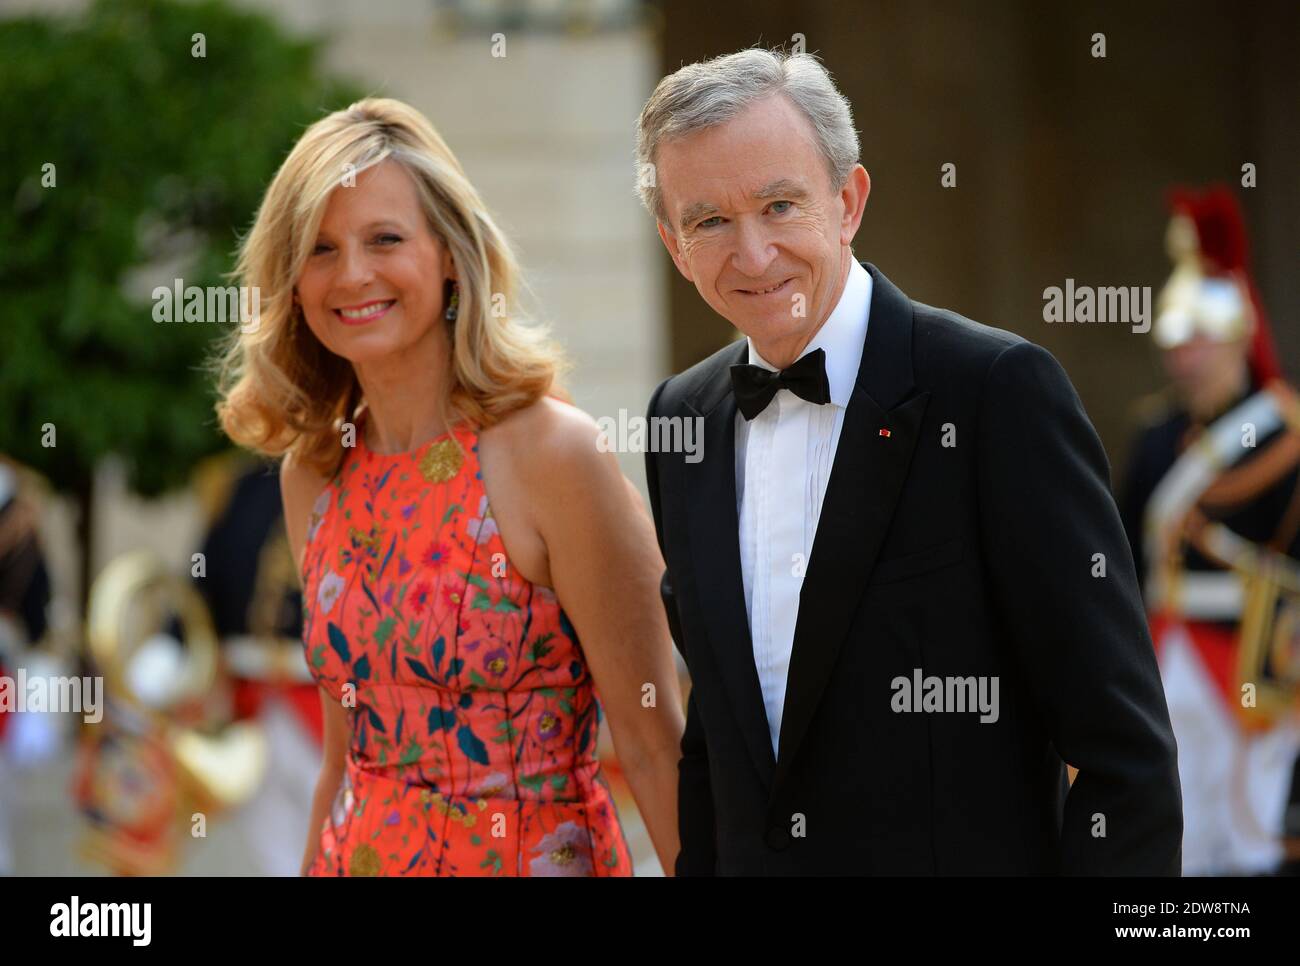 Bernard Arnault and his wife Helene Mercier-Arnault at the funeral of  Laurence Chirac (elder daughter of Former president Jacques Chirac and  Bernadette Chirac) held at the Sainte Clotilde Church in Paris, France